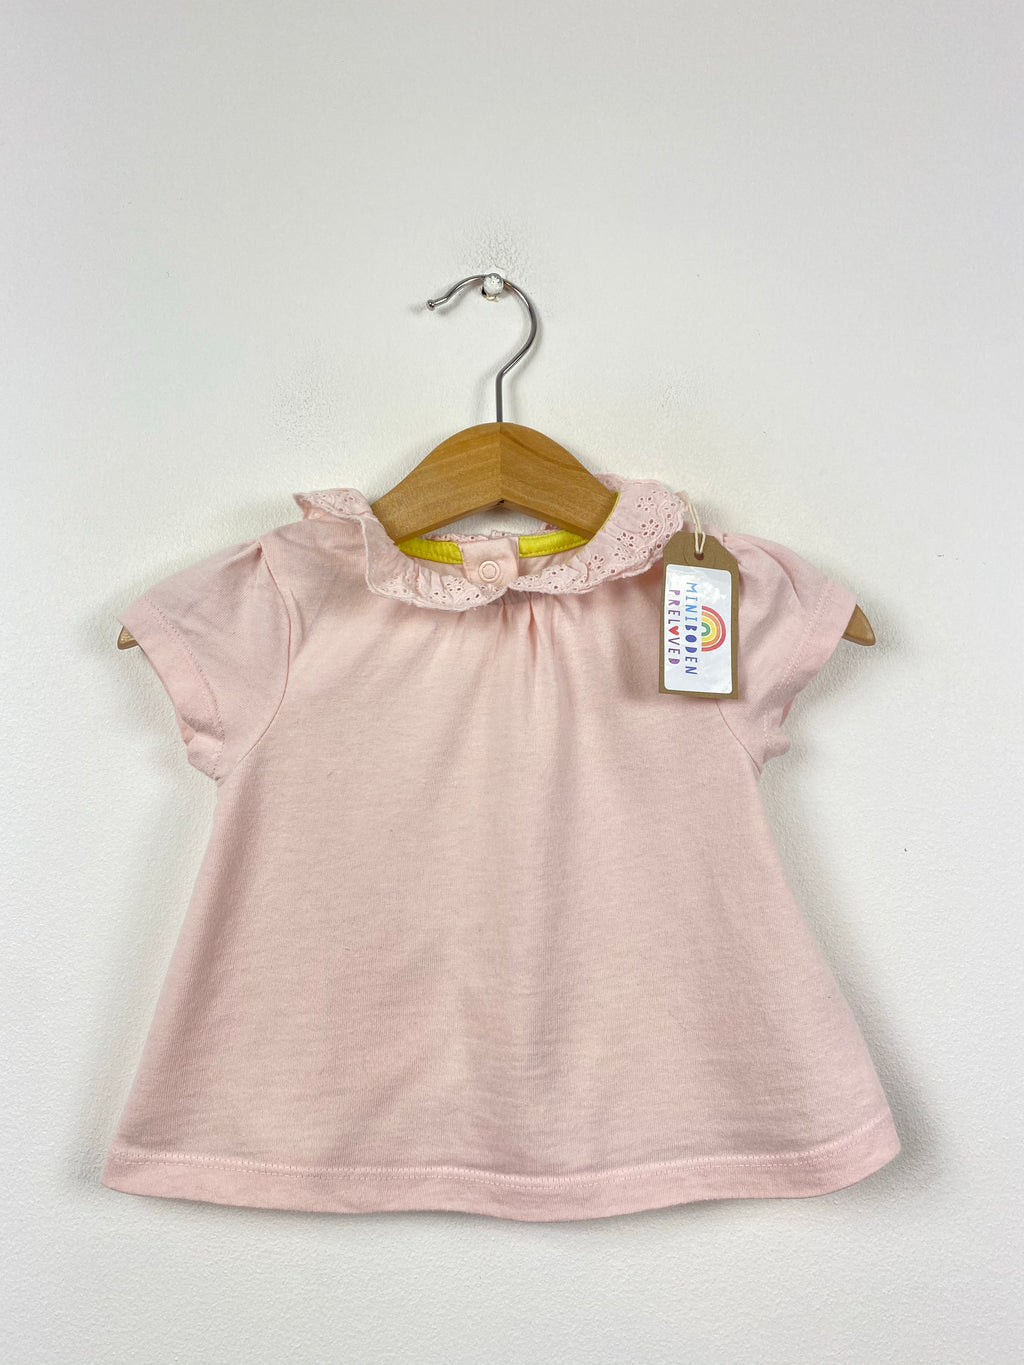 Lace Collared Pale Pink Top (3-6 Months)